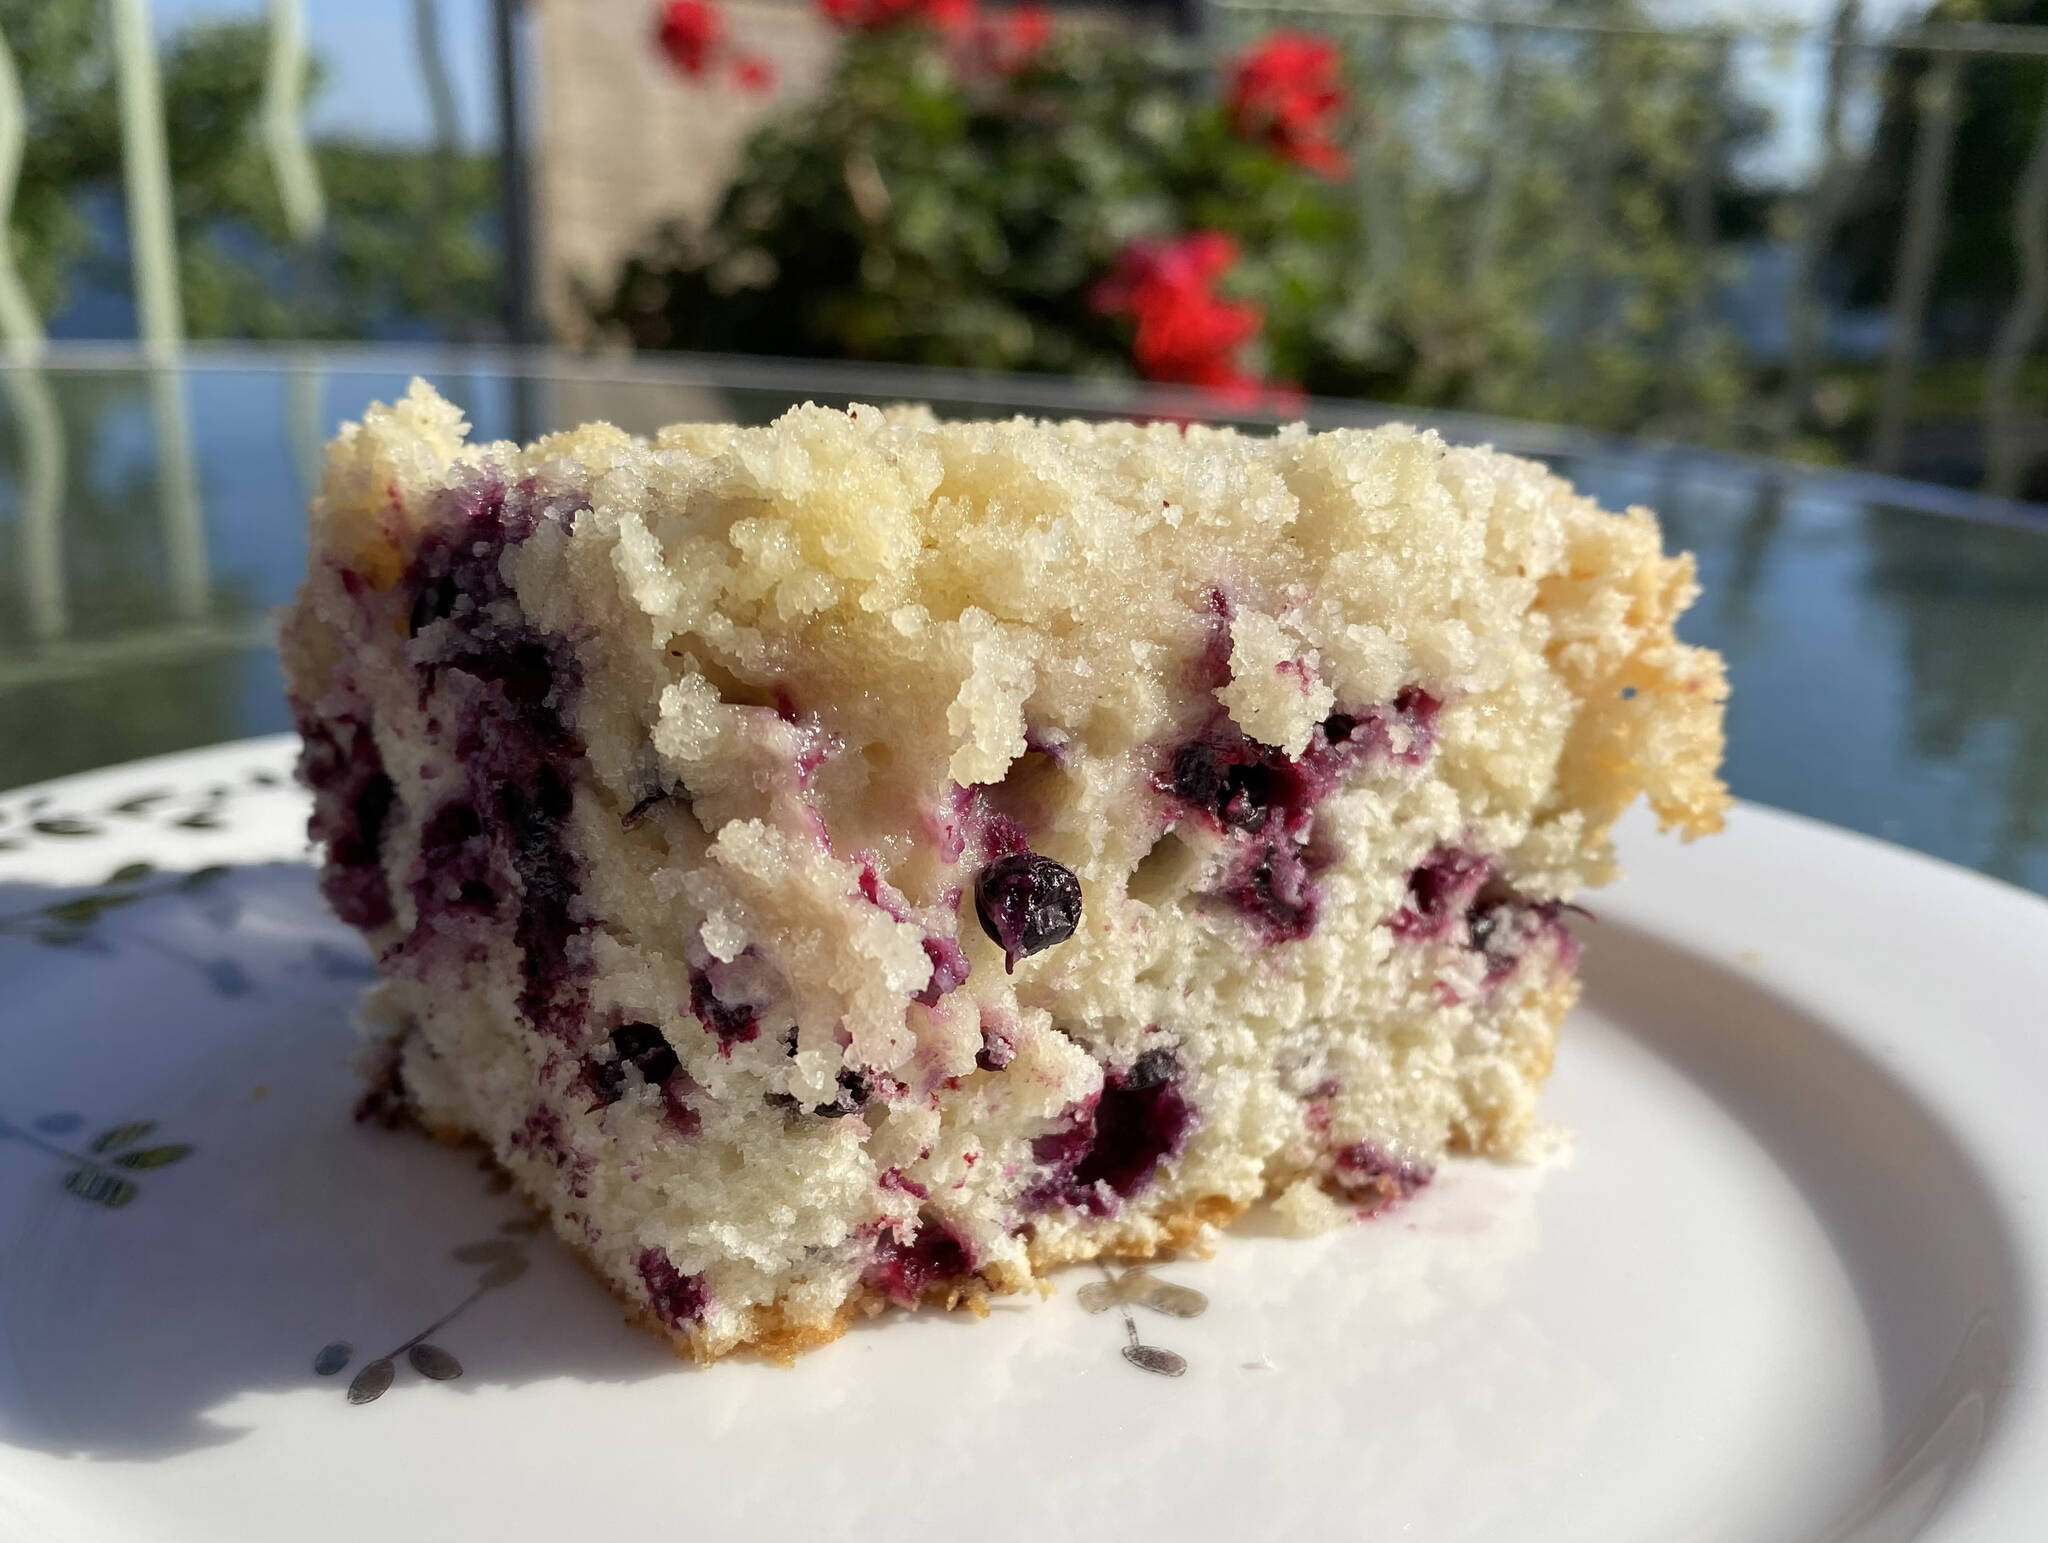 Blueberry buckle conjures warm memories of family. (Photo by Tressa Dale/Peninsula Clarion)